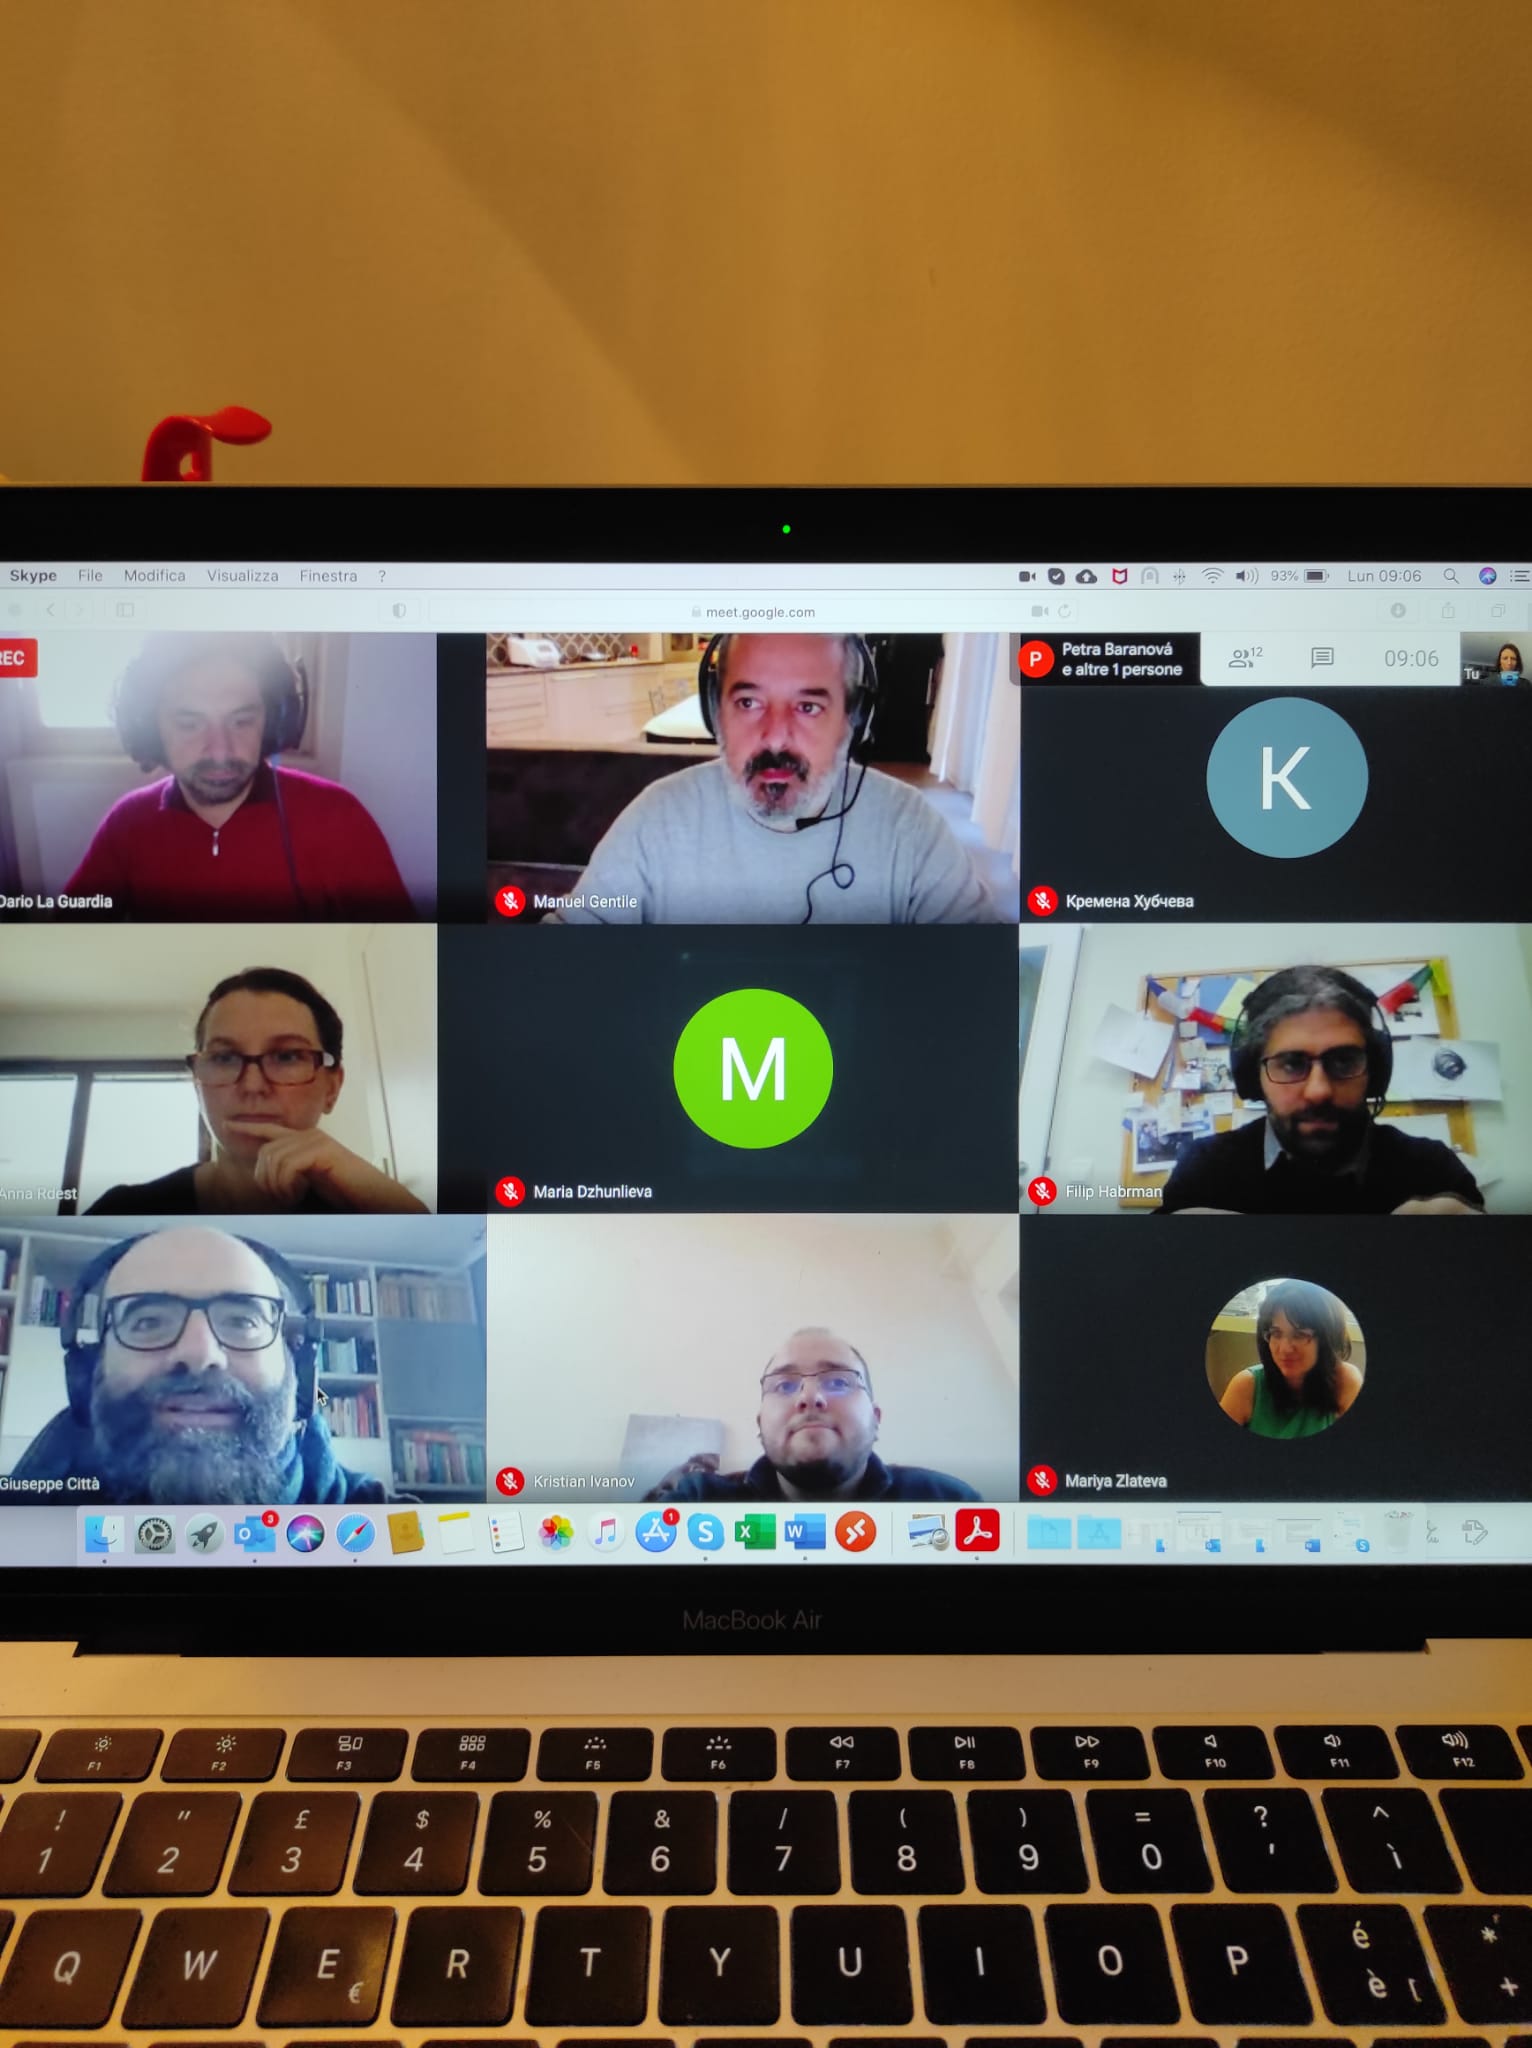 Image from November 30, 2020 all ATU project partners participated in an online meeting via Google meet platform